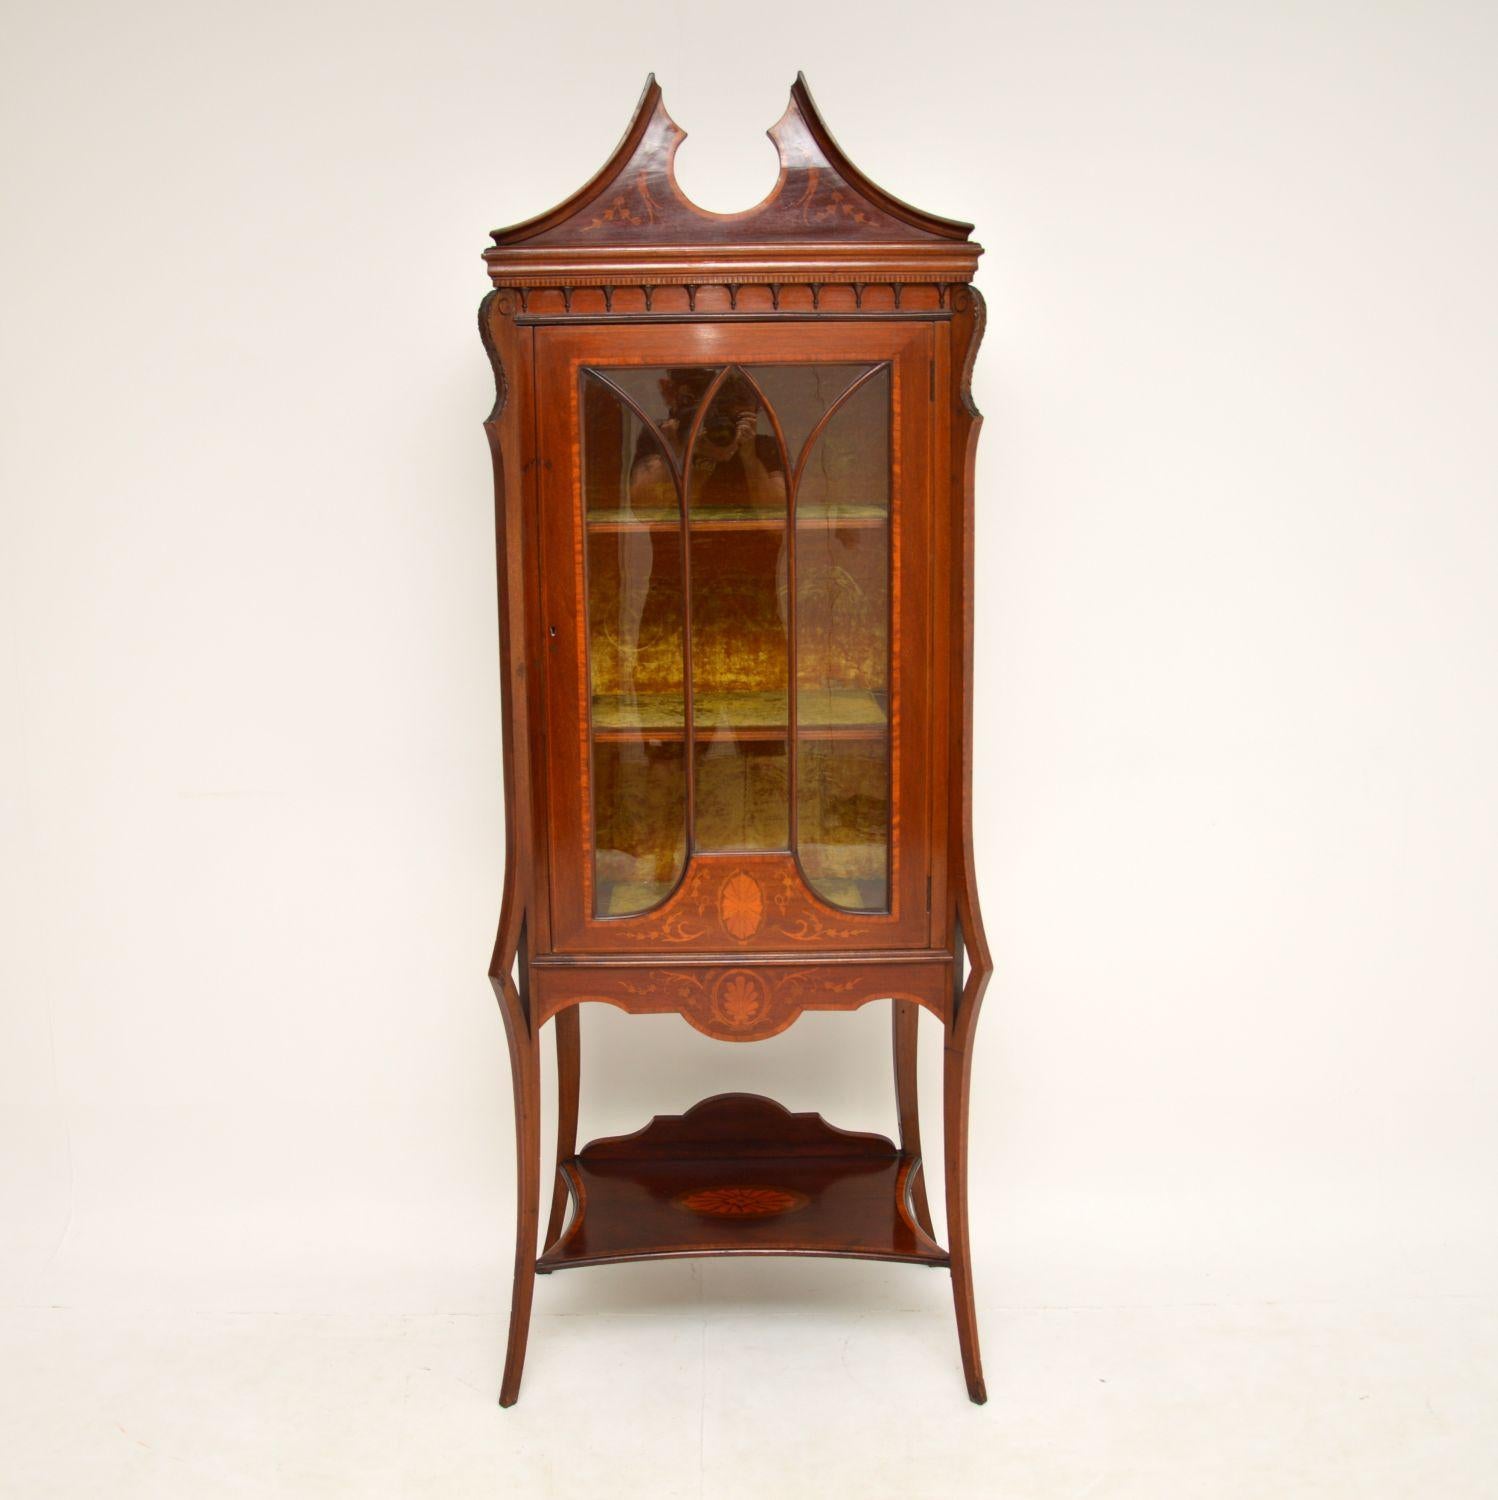 A stunning antique Edwardian display cabinet, this is one of the best models we have come across. It dates from the 1890-1910 period.

The quality is outstanding, and this has a wonderfully elegant design. There is fine satin wood inlaid marquetry